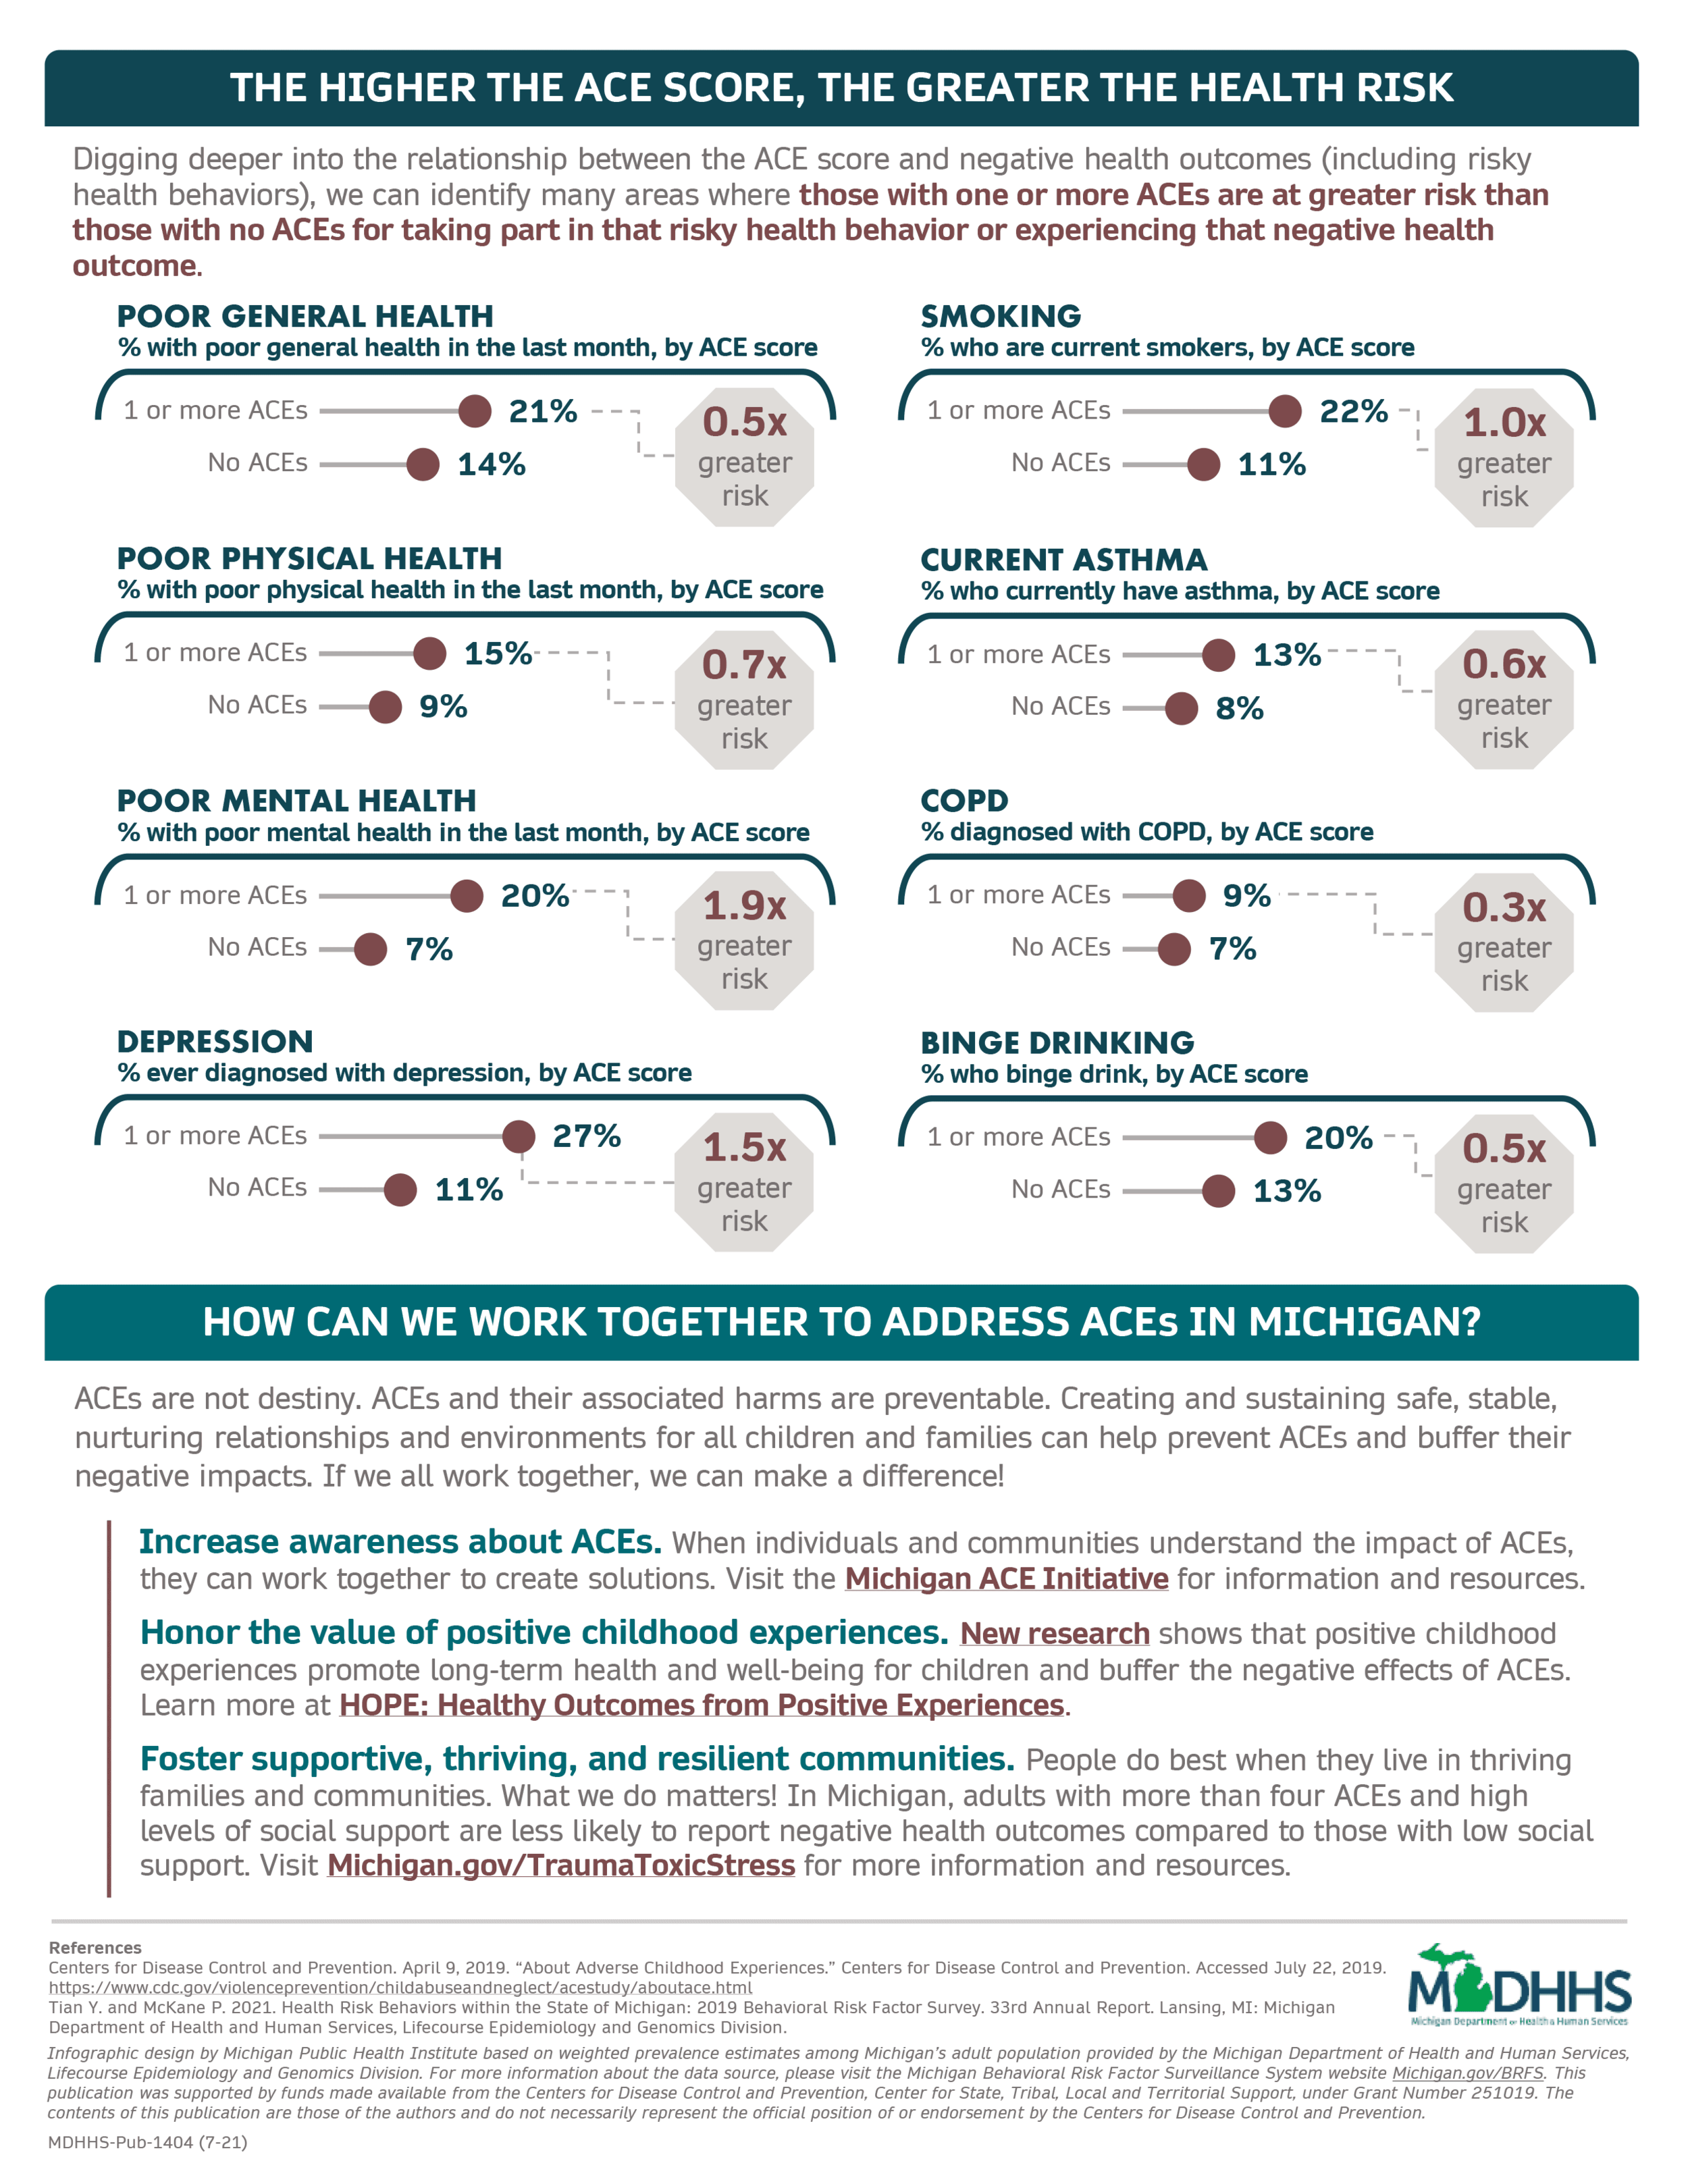 2019_ACEs_Michigan_Adult_Infographic_FINAL_DRAFT_738359_7 (1)-2.png